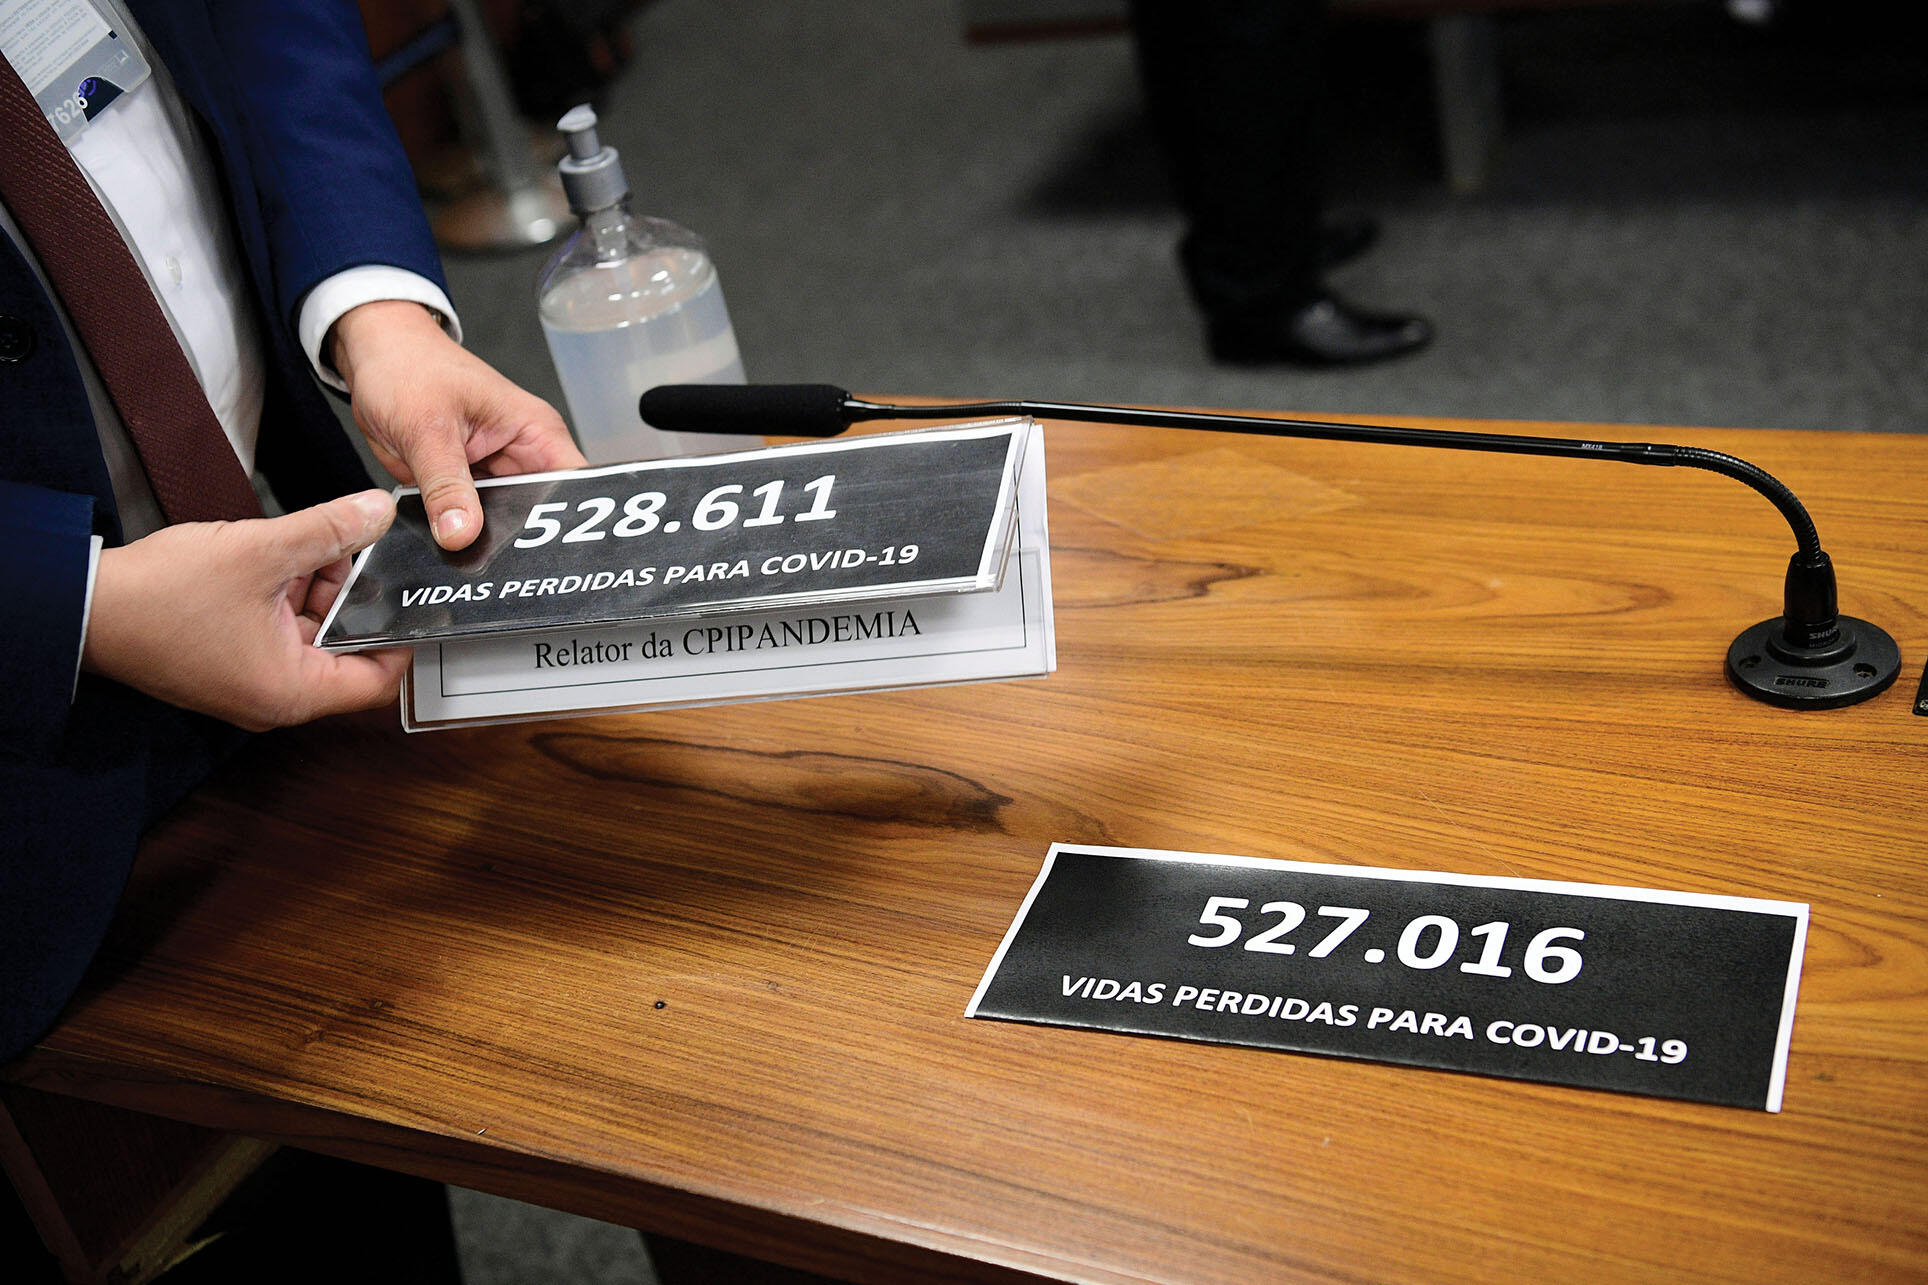 At a July 2021 inquiry on Brazil’s pandemic response, nameplates are replaced by updated numbers of the over 500,000 lives lost due to Covid-19. (Photo by Pedro França/Agência Senado.)